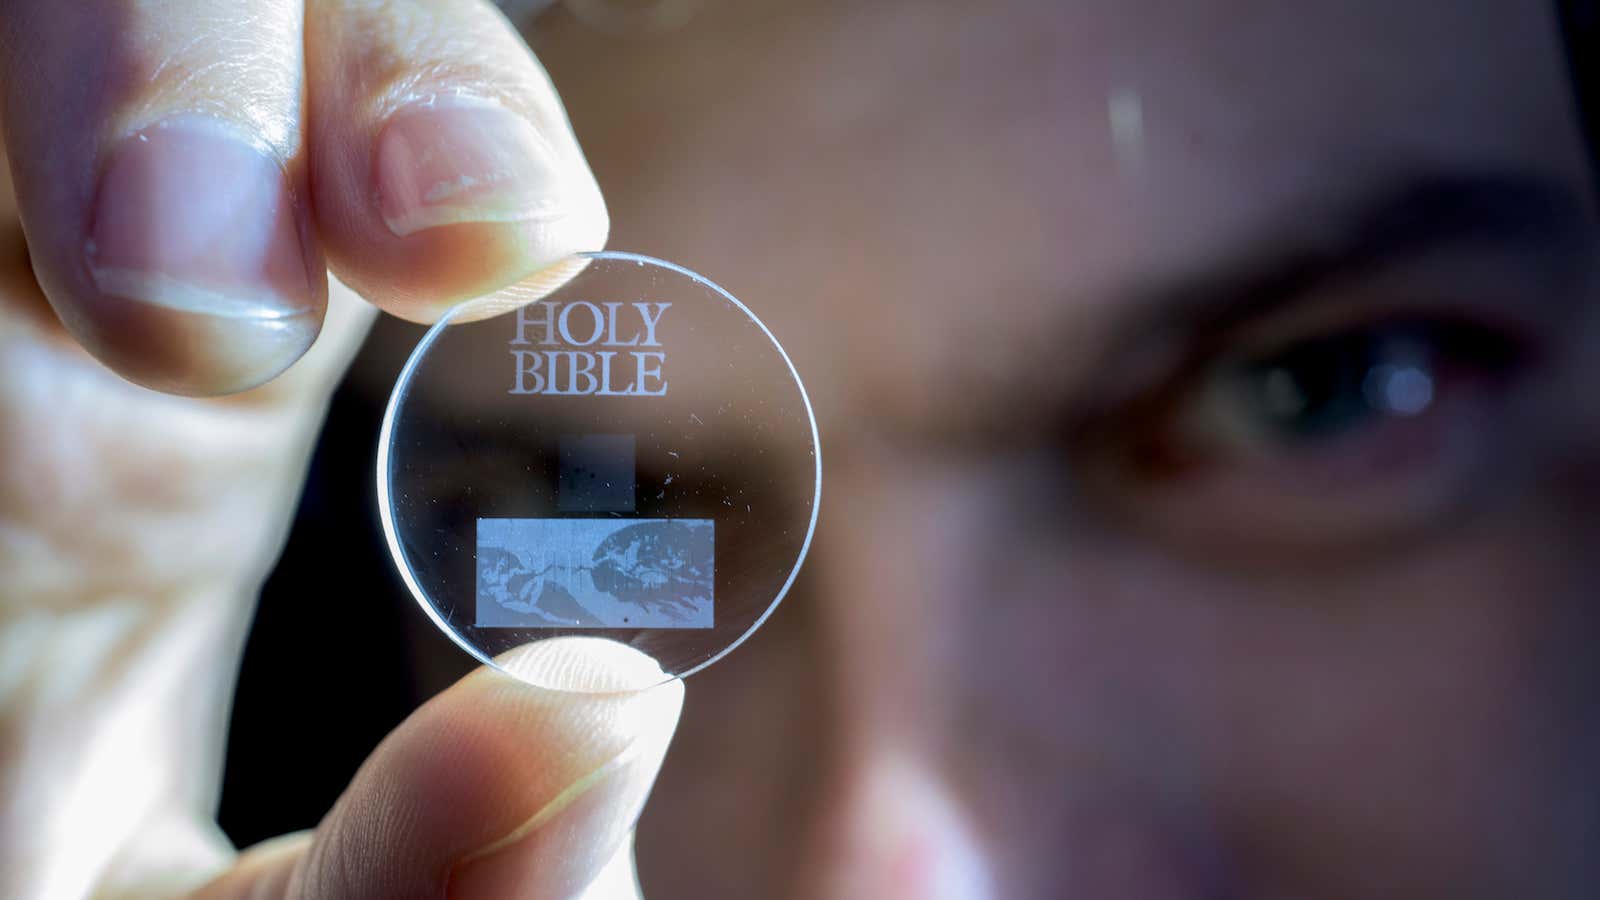 This tiny disc can store the entire Holy Bible for billions of years.